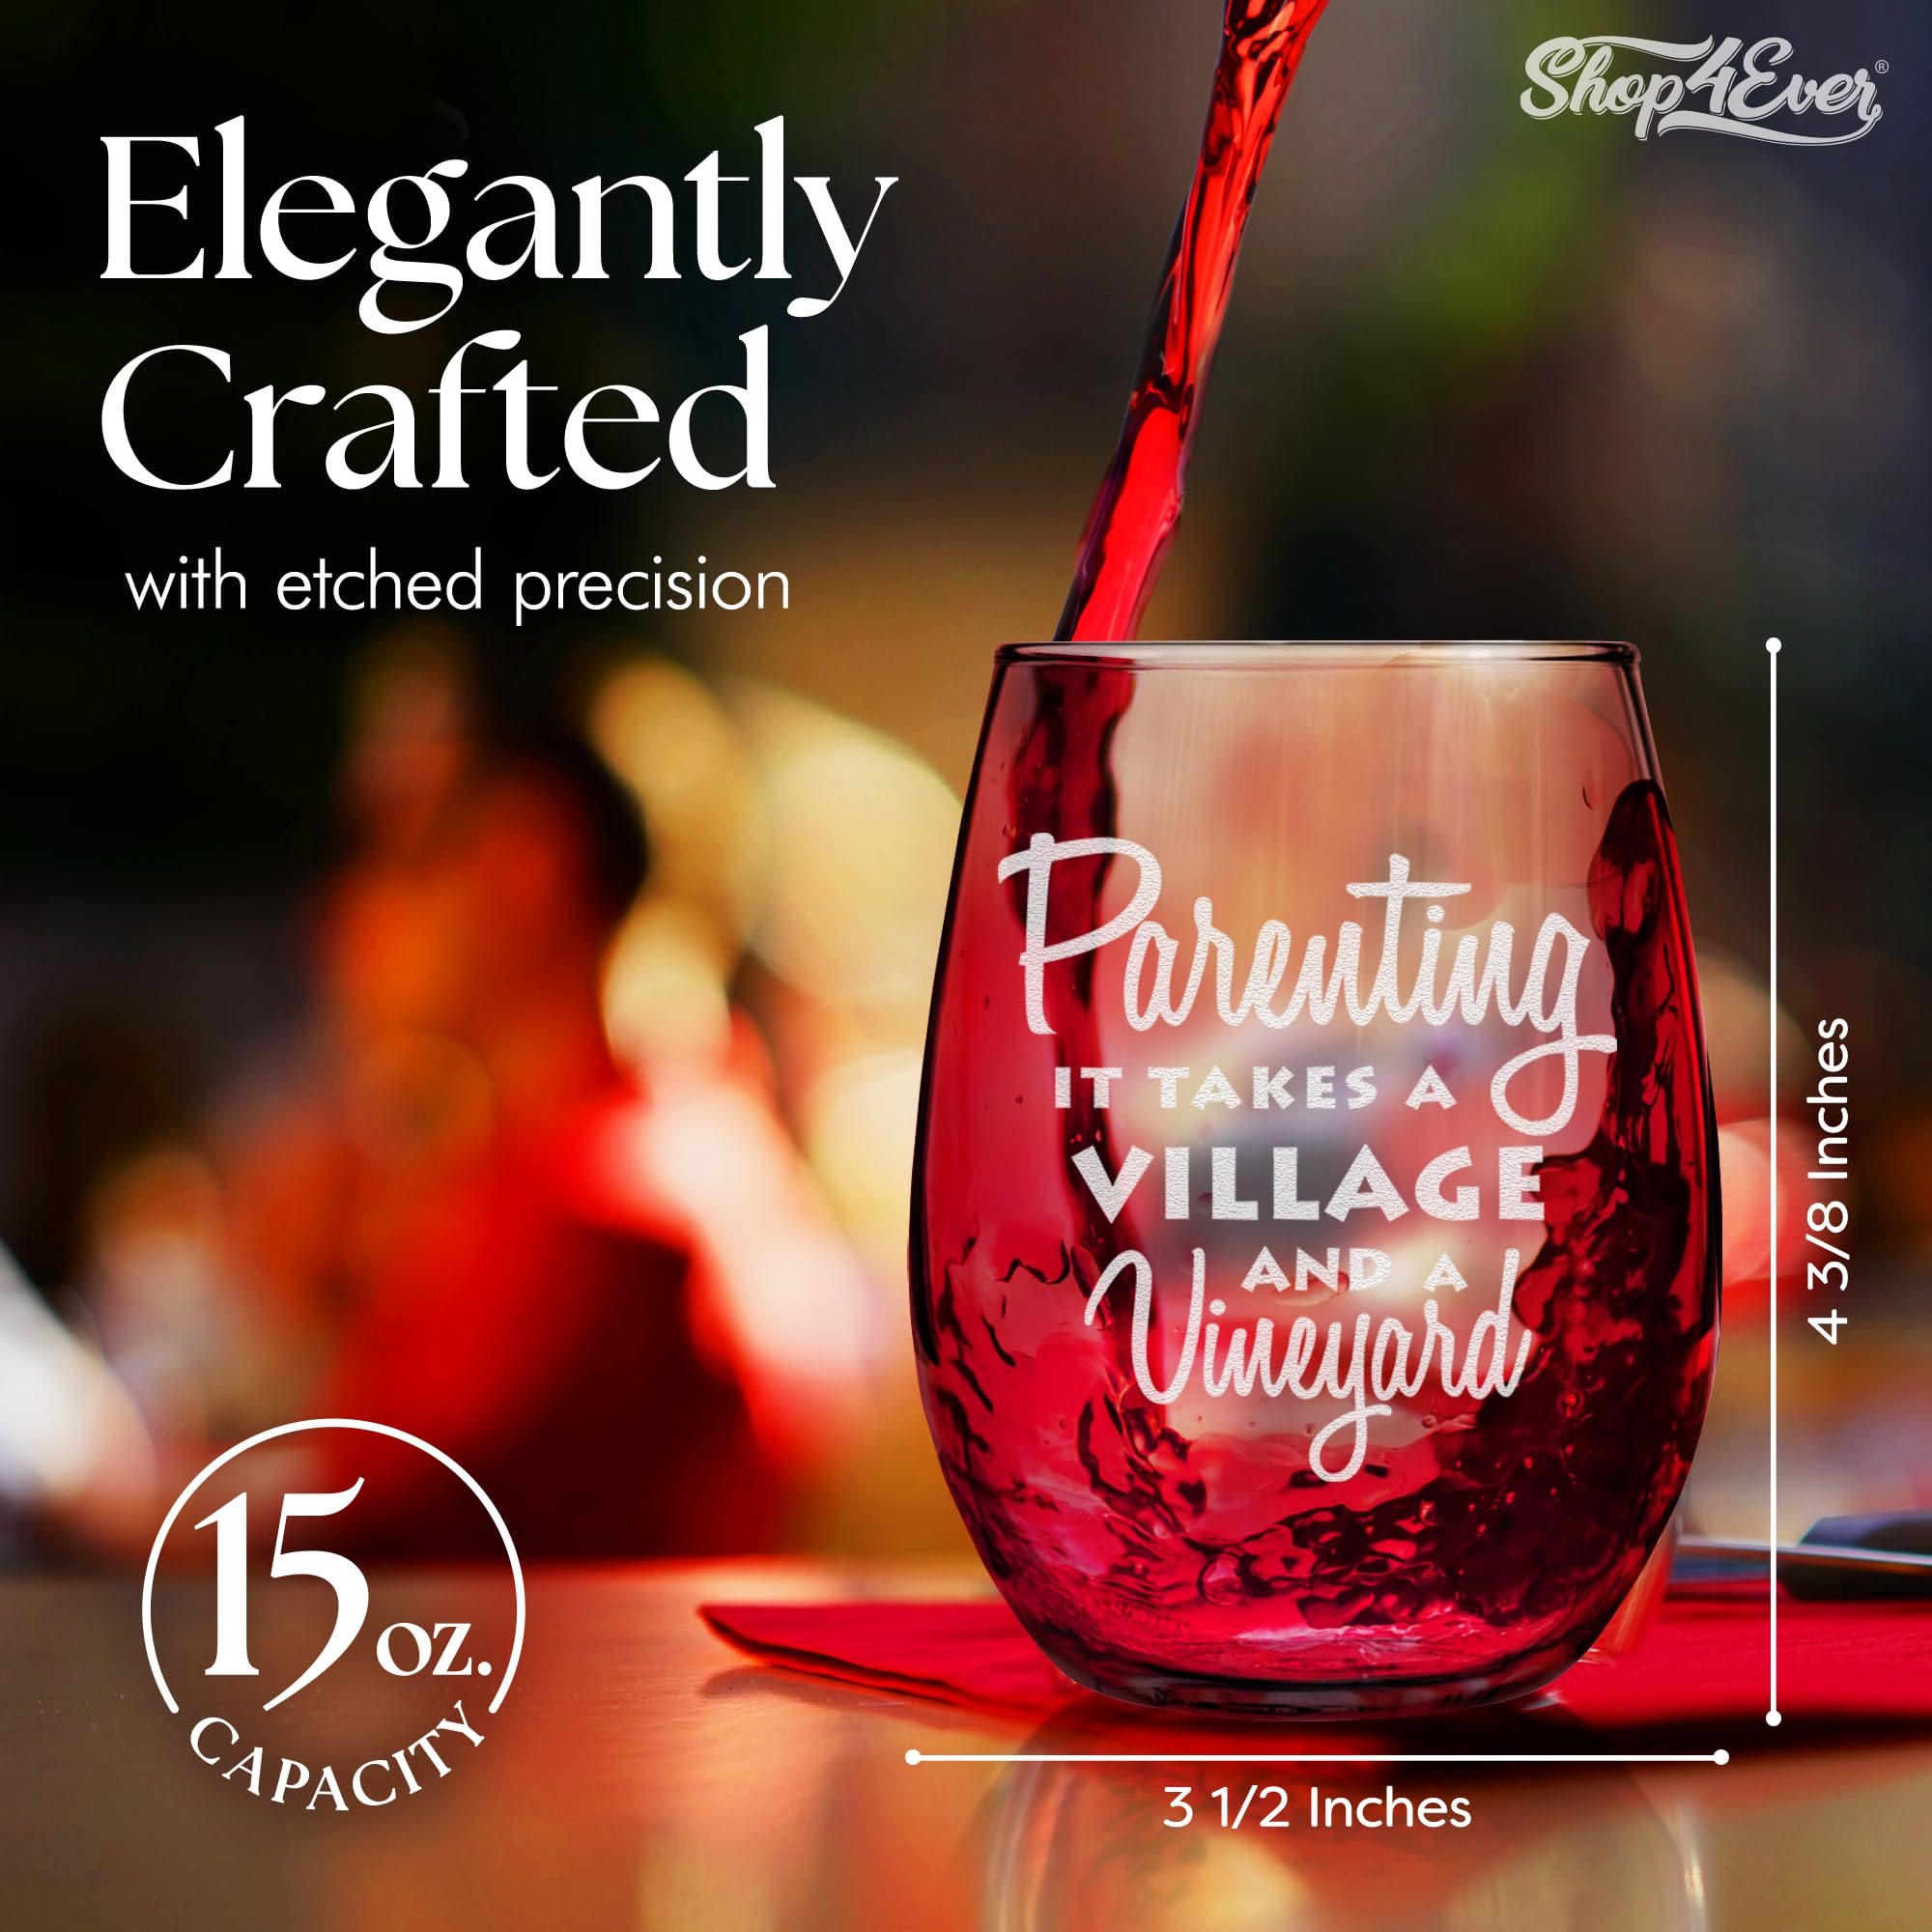 shop4ever Parenting it Takes a Village and a Vineyard Laser Engraved Stemless Wine Glass 15 oz. Gift for Mom